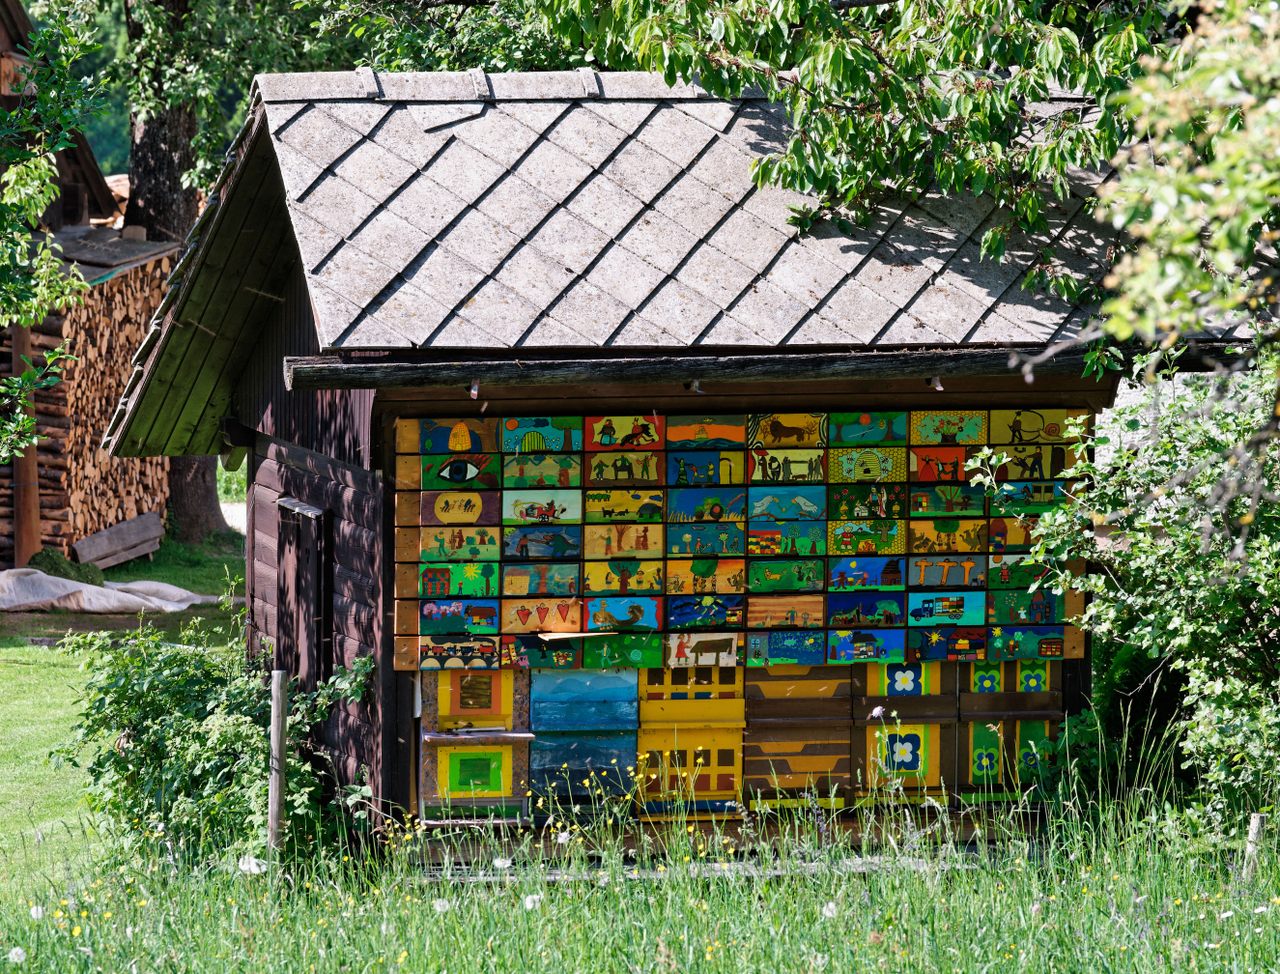 The panels on every AŽ hive house tell a story.